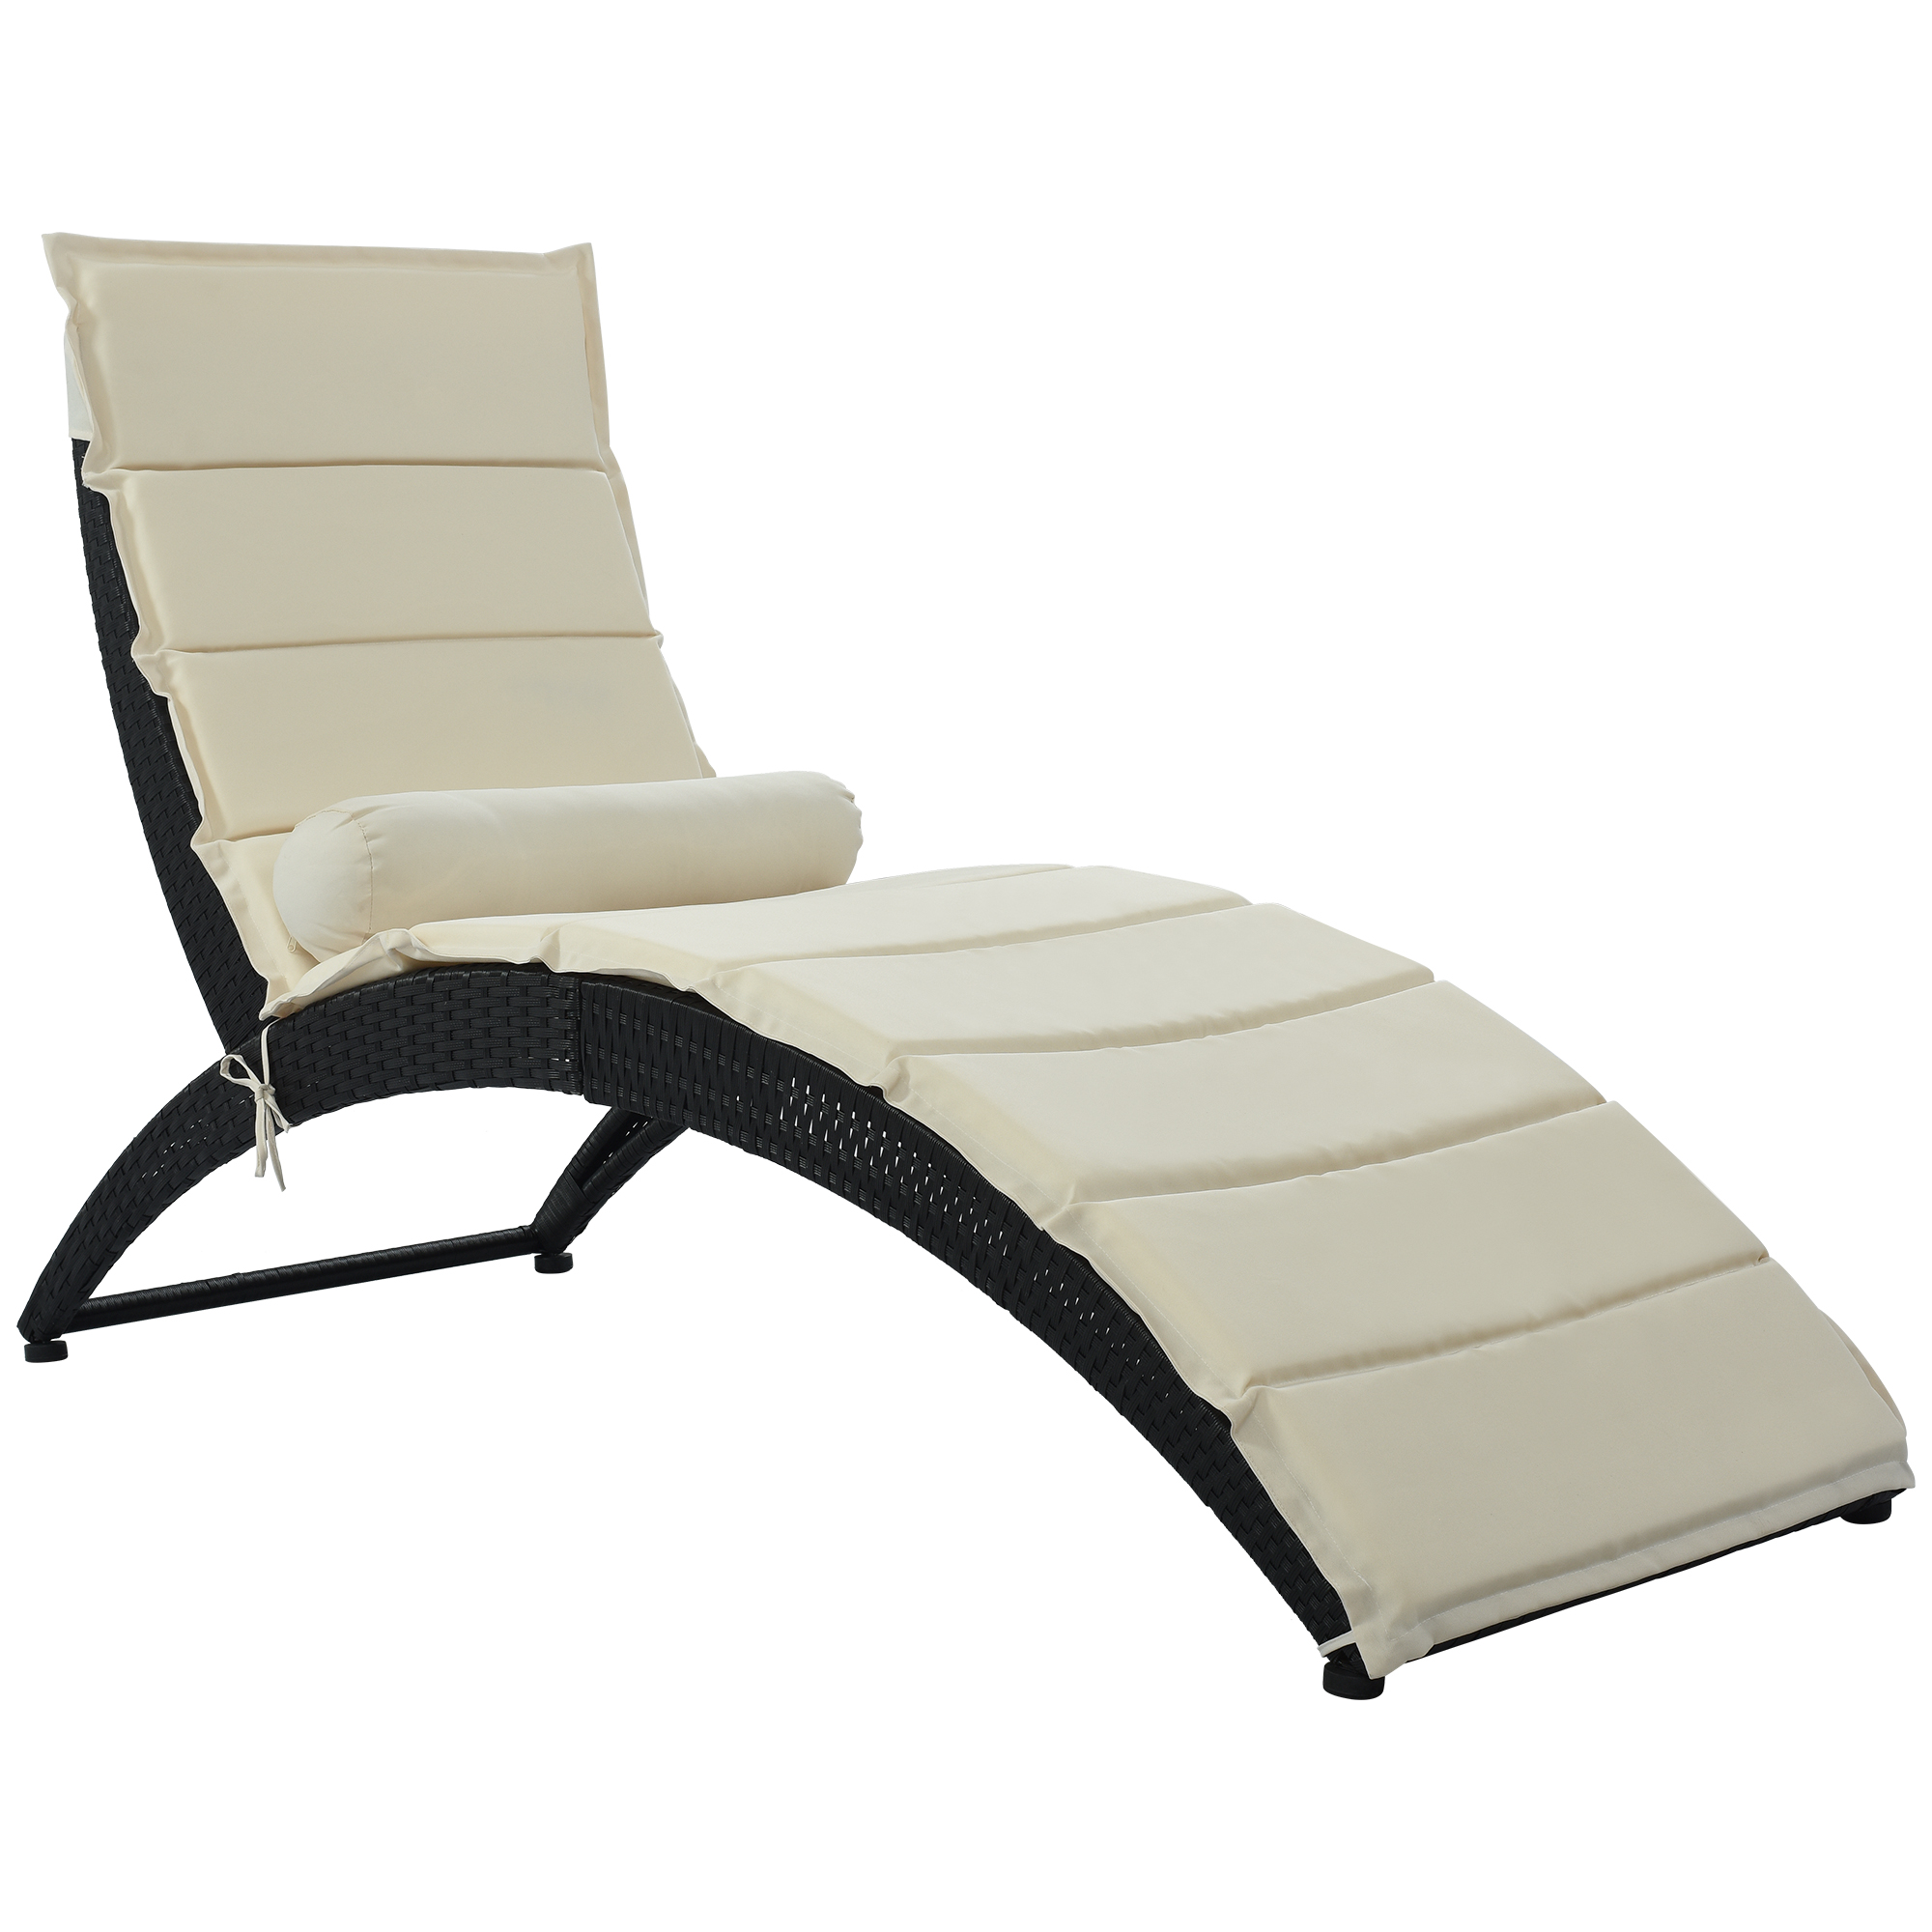 Sesslife Chaise Lounge Chairs for Outside, Patio Adjustable Lounge Chairs with Table Outdoor Rattan Wicker Pool Chaise Lounge Chairs Cushioned Poolside Folding Chaise Lounge Set - image 3 of 10